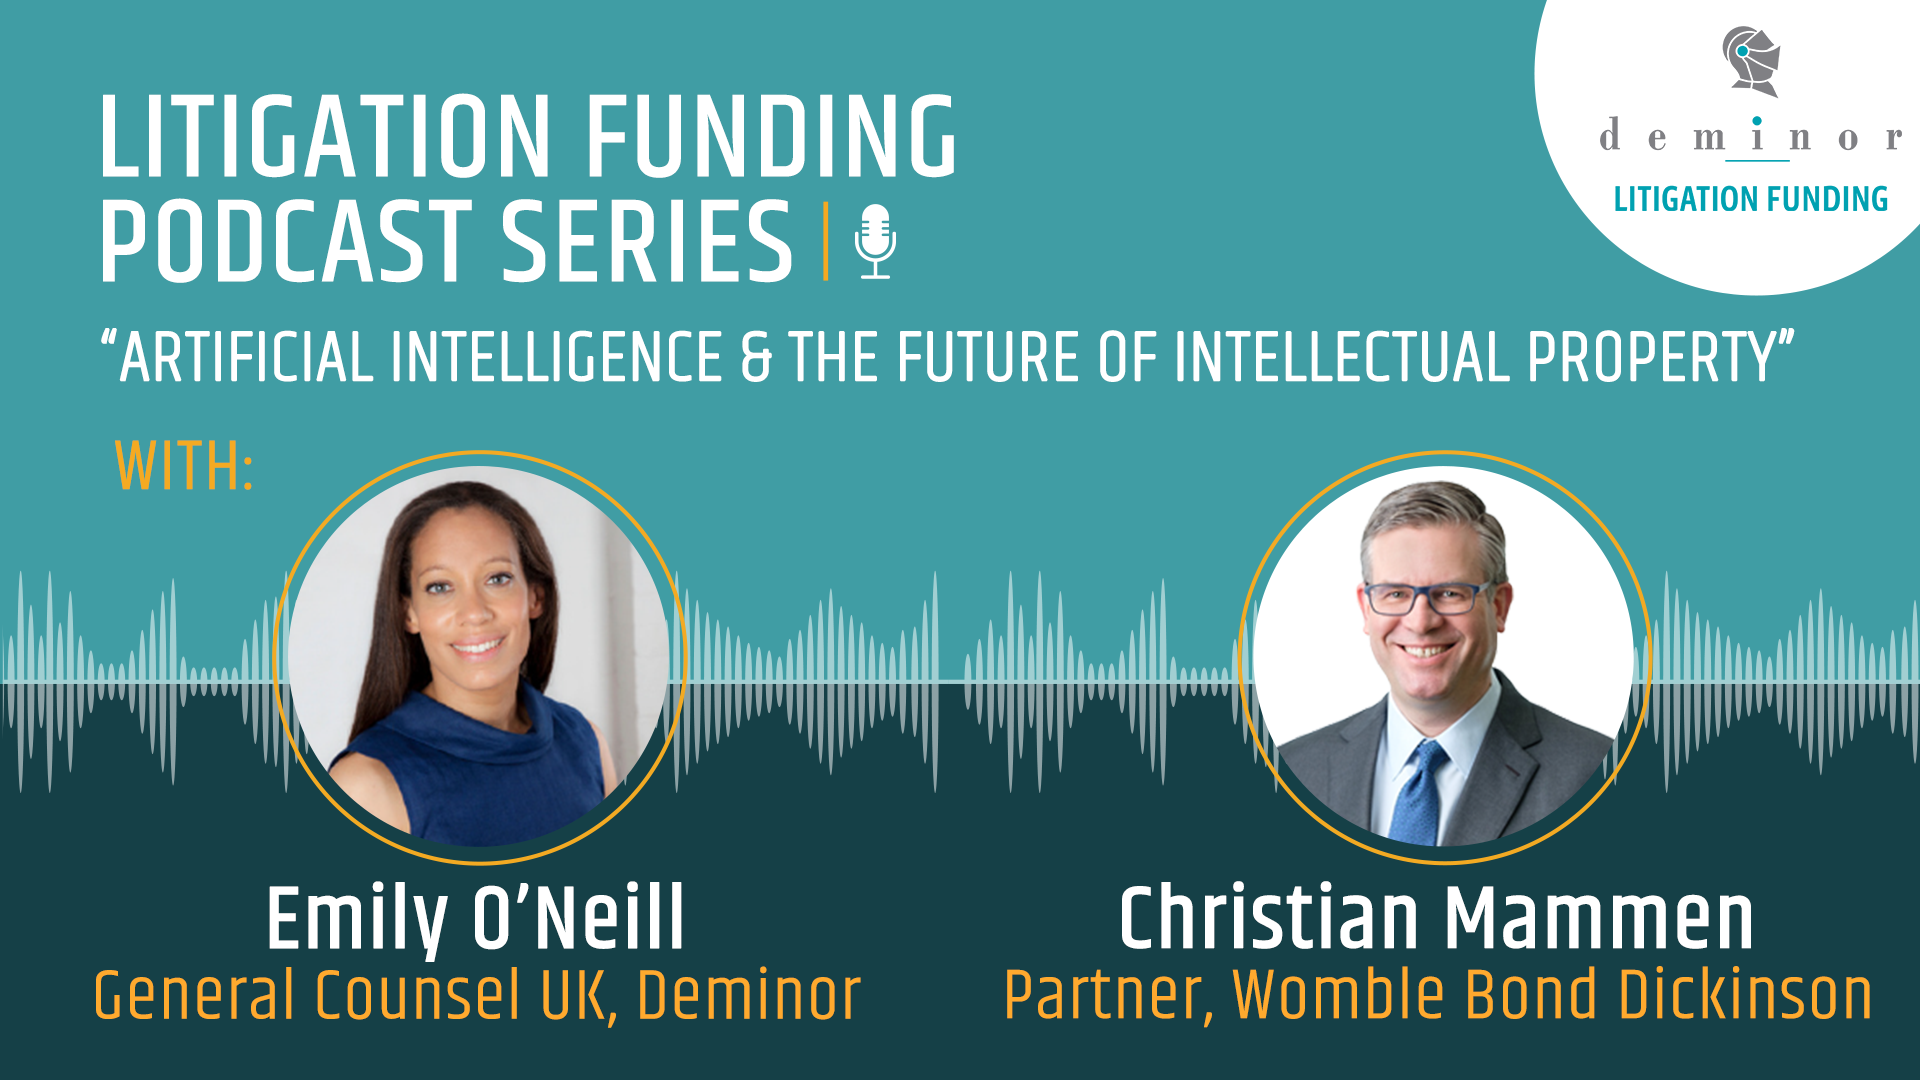 Litigation Funding Podcast Series: Artificial Intelligence & The Future of Intellectual Property